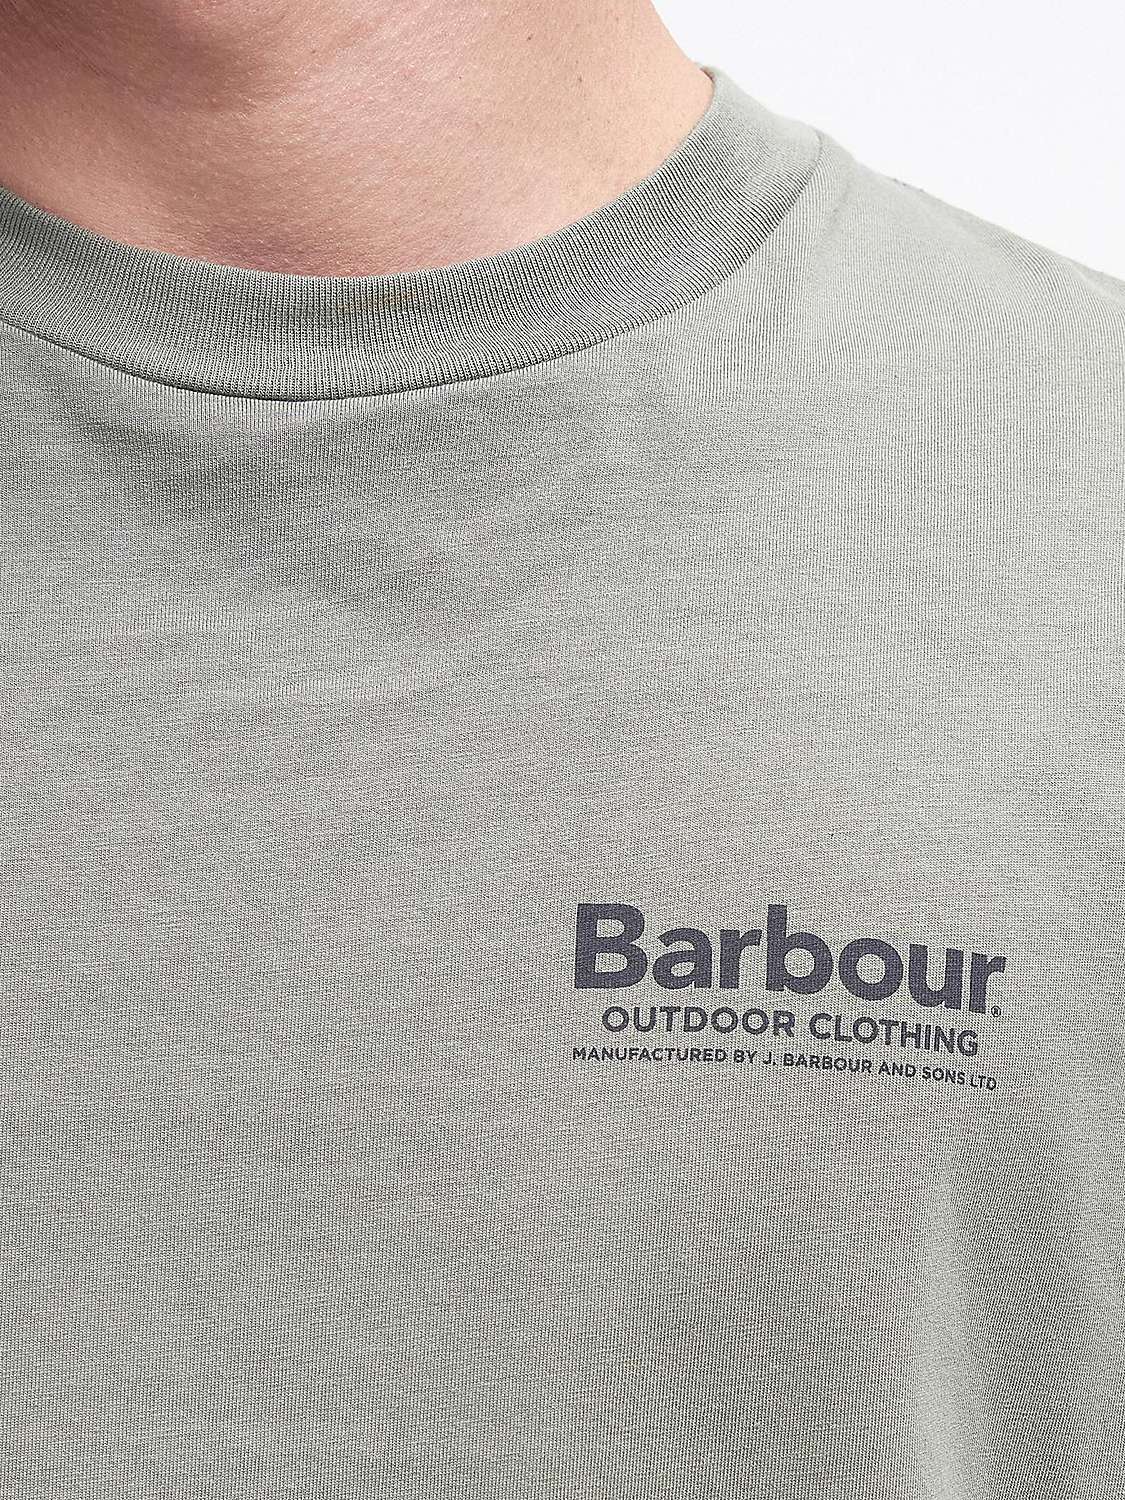 Buy Barbour Catterick T-Shirt, Dusty Olive Online at johnlewis.com